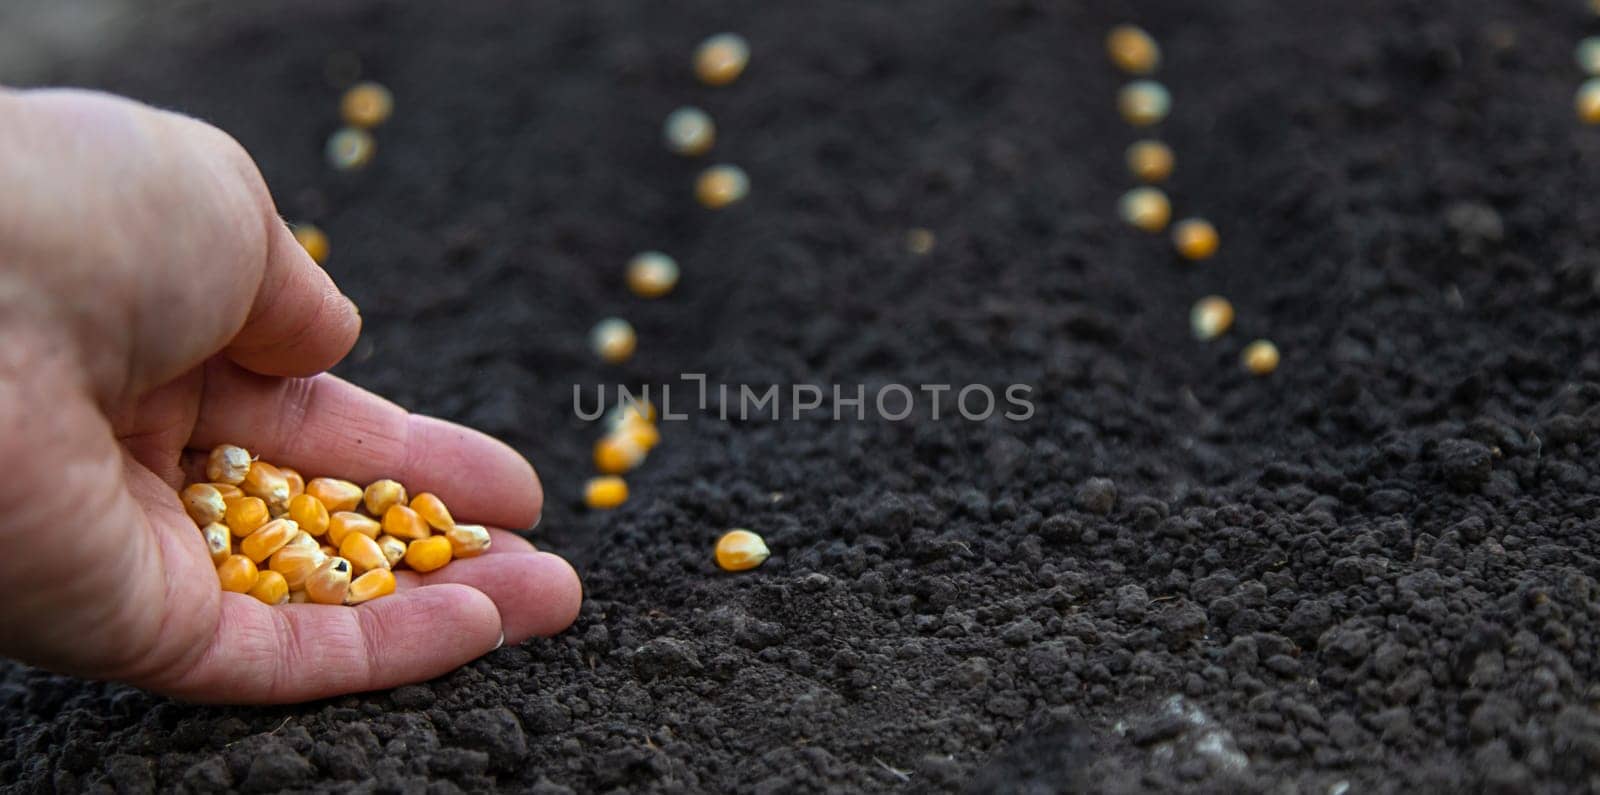 Sow seeds in the garden for rose gardens. selective focus. by yanadjana